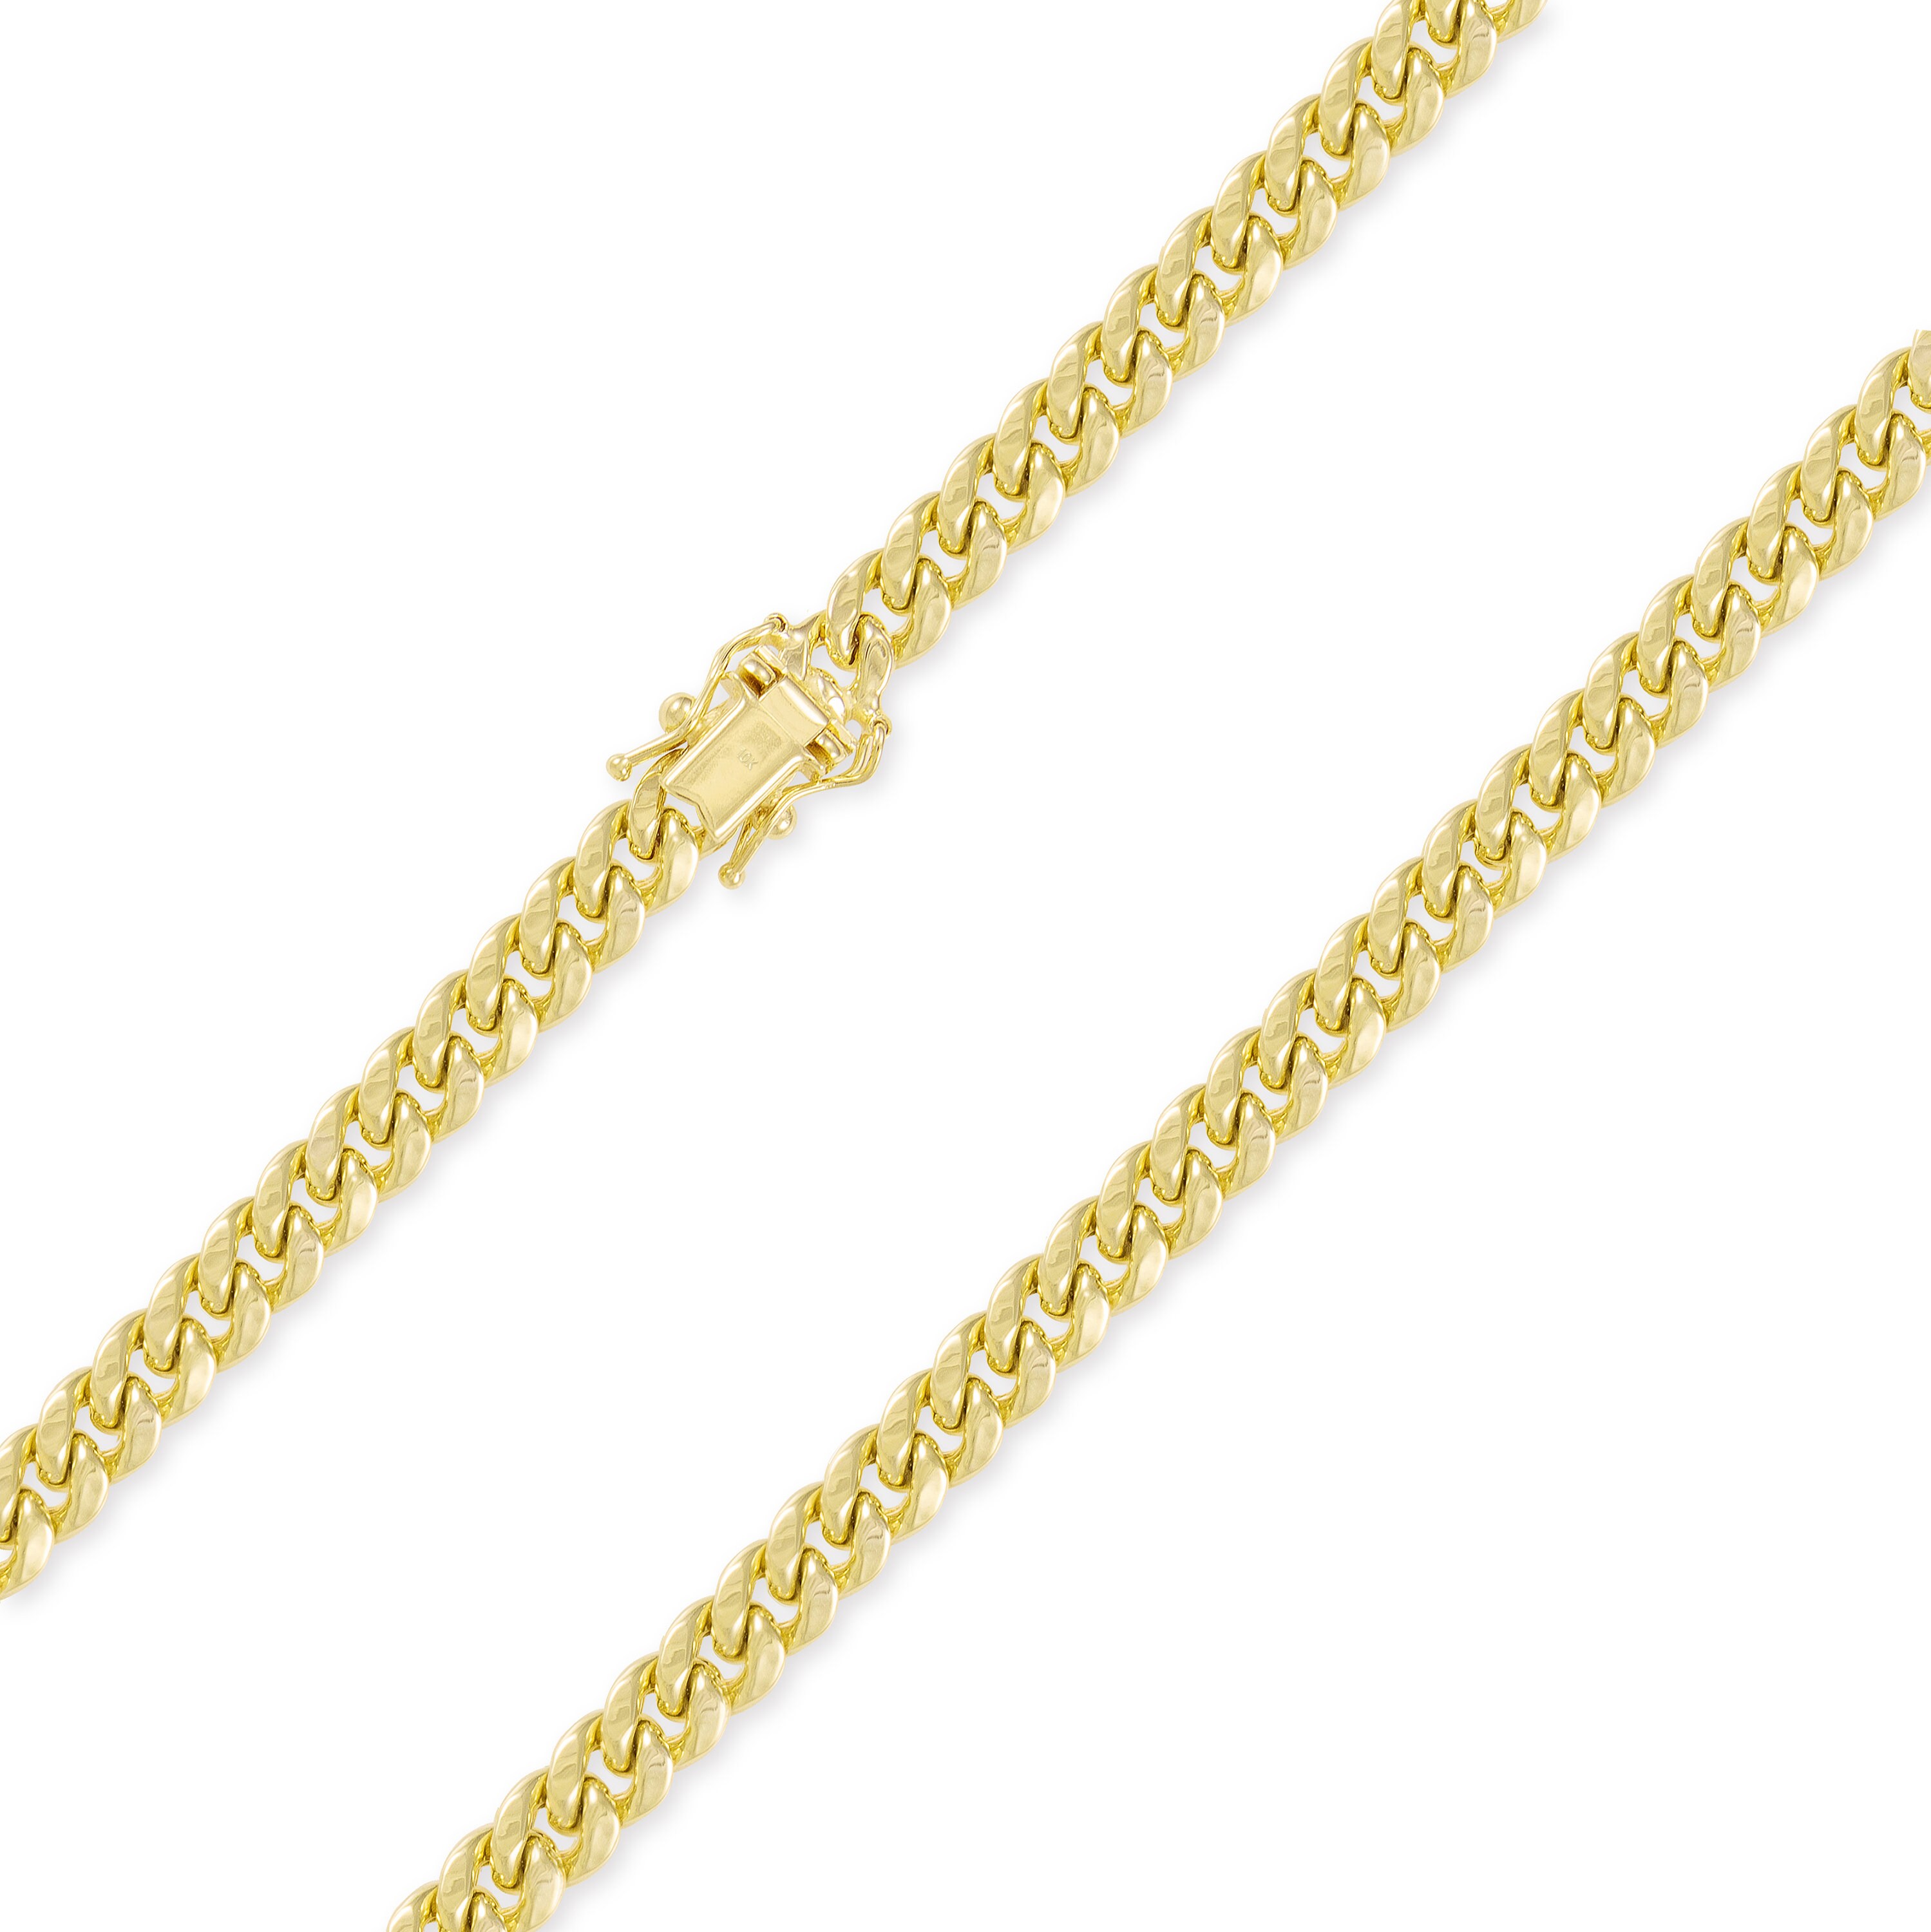 10K Yellow Gold Hollow Miami Cuban Necklace Chain 4-11mm 18-30" Curb Link Men Wm 